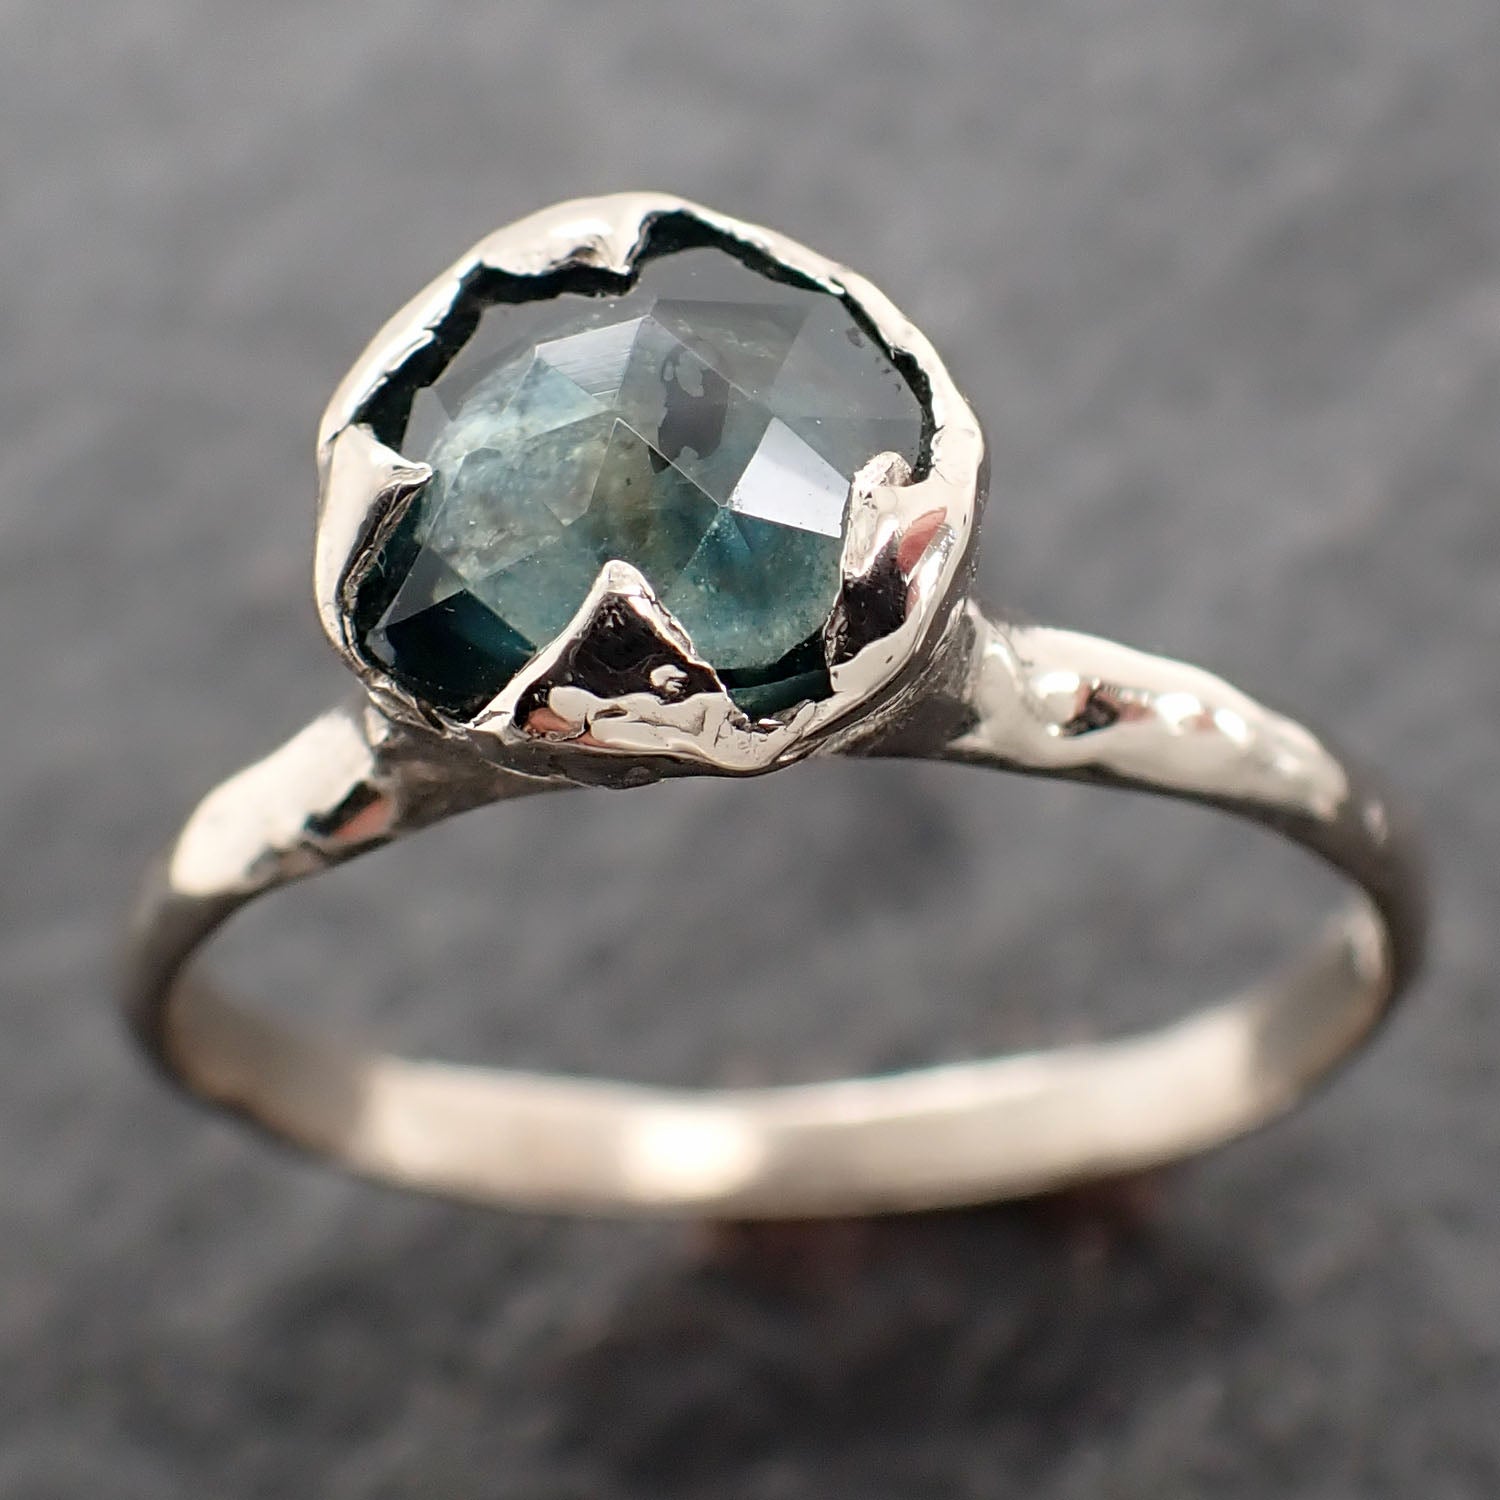 Fancy cut Montana blue green Sapphire 14k White gold Solitaire Ring Gold Gemstone Engagement Ring 2620